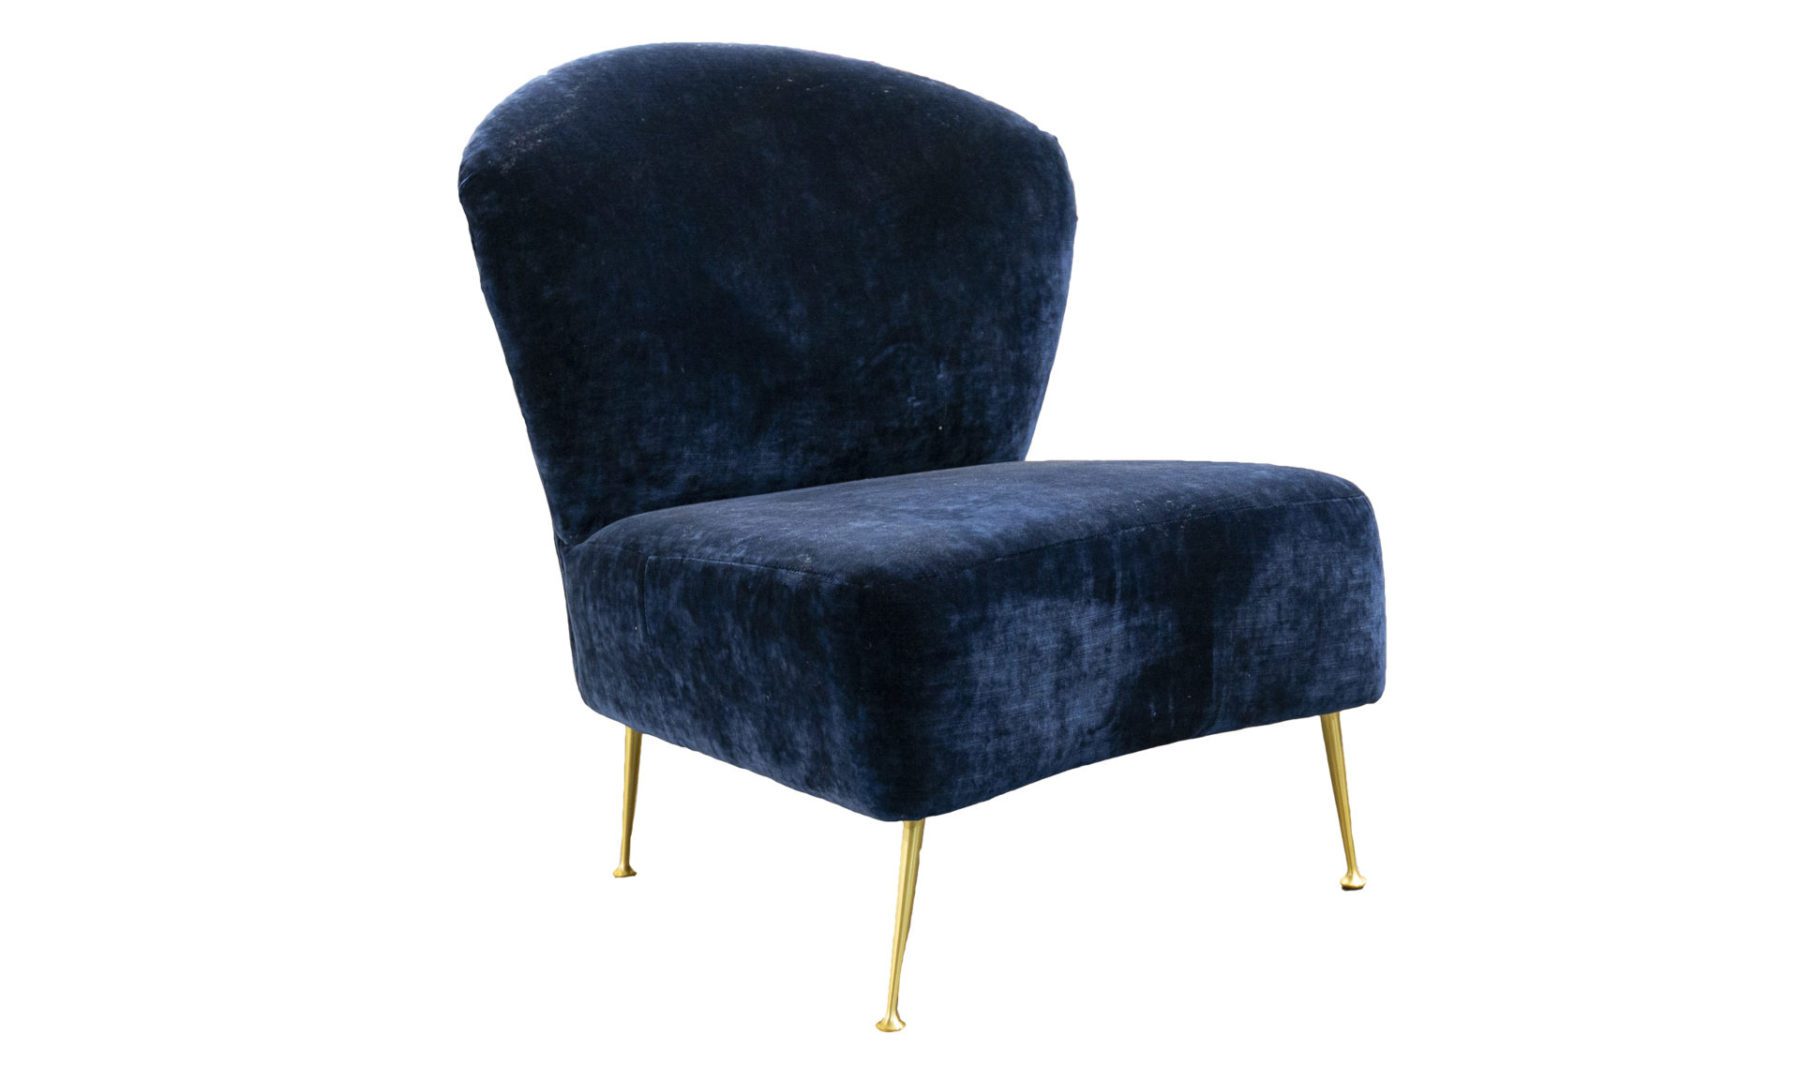 Philly Chair in Boulder Navy, Platinum Collection Fabric